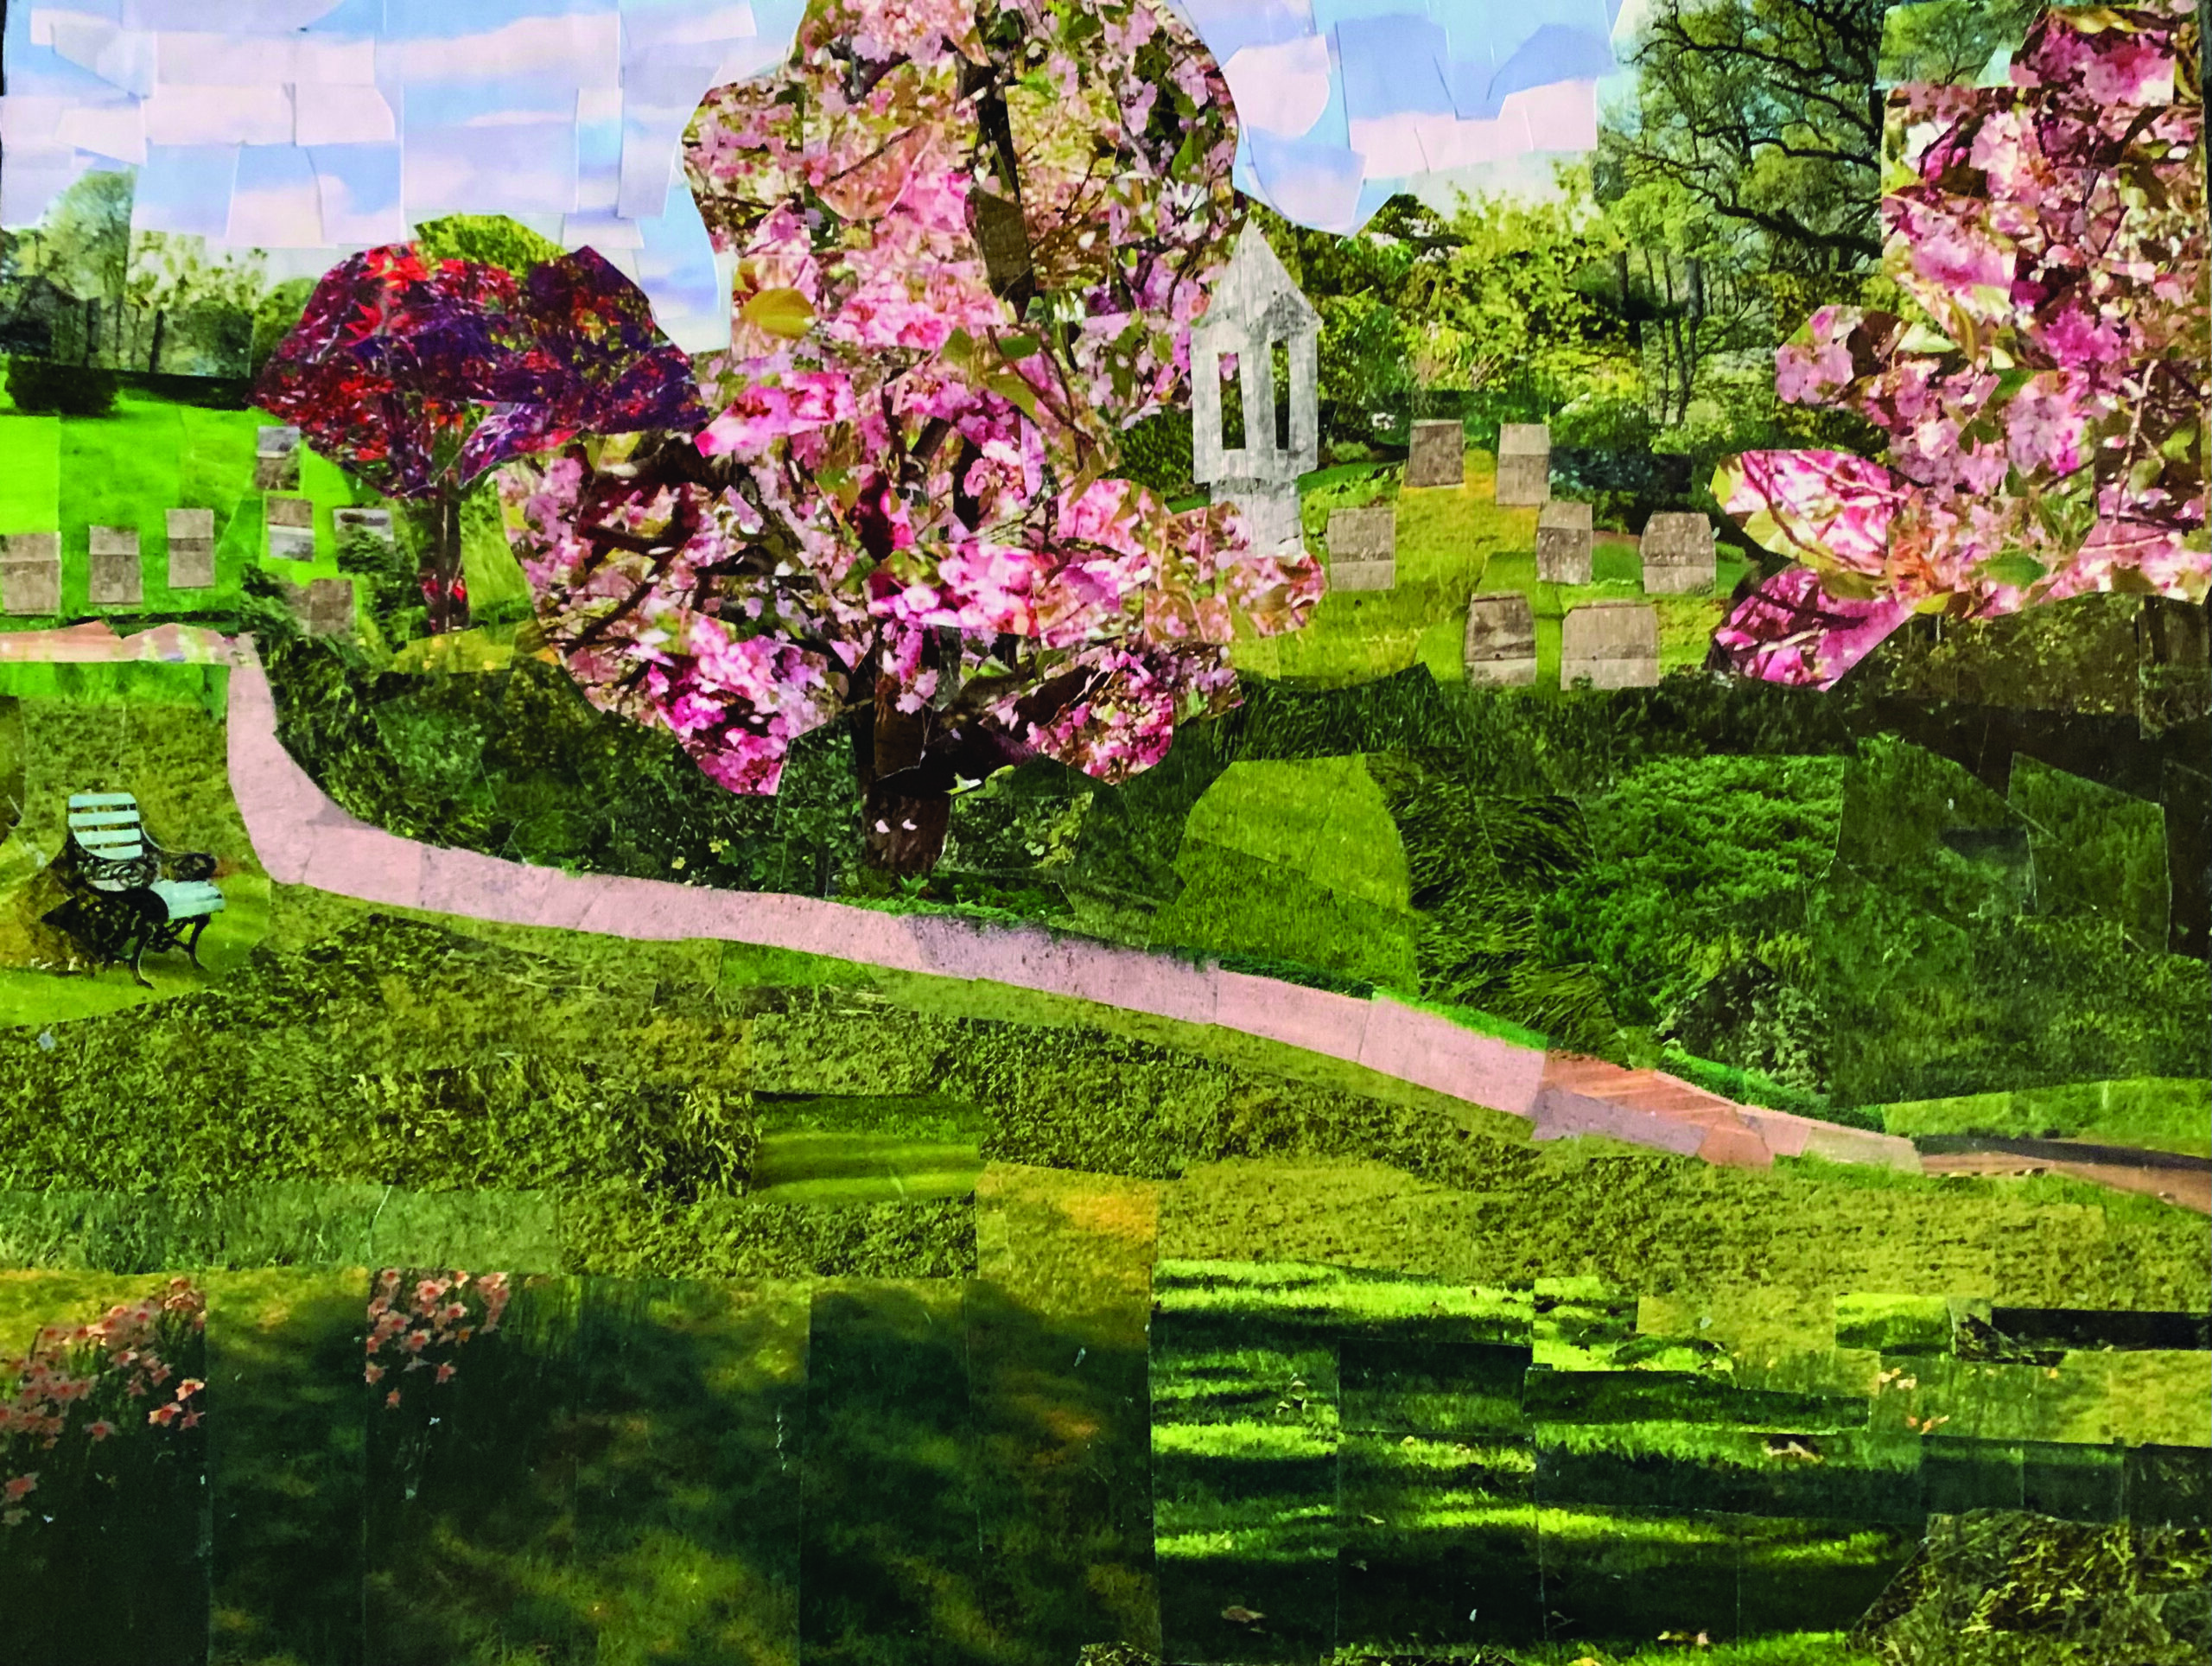 a collaged spring scene with lush grass, and trees in bloom